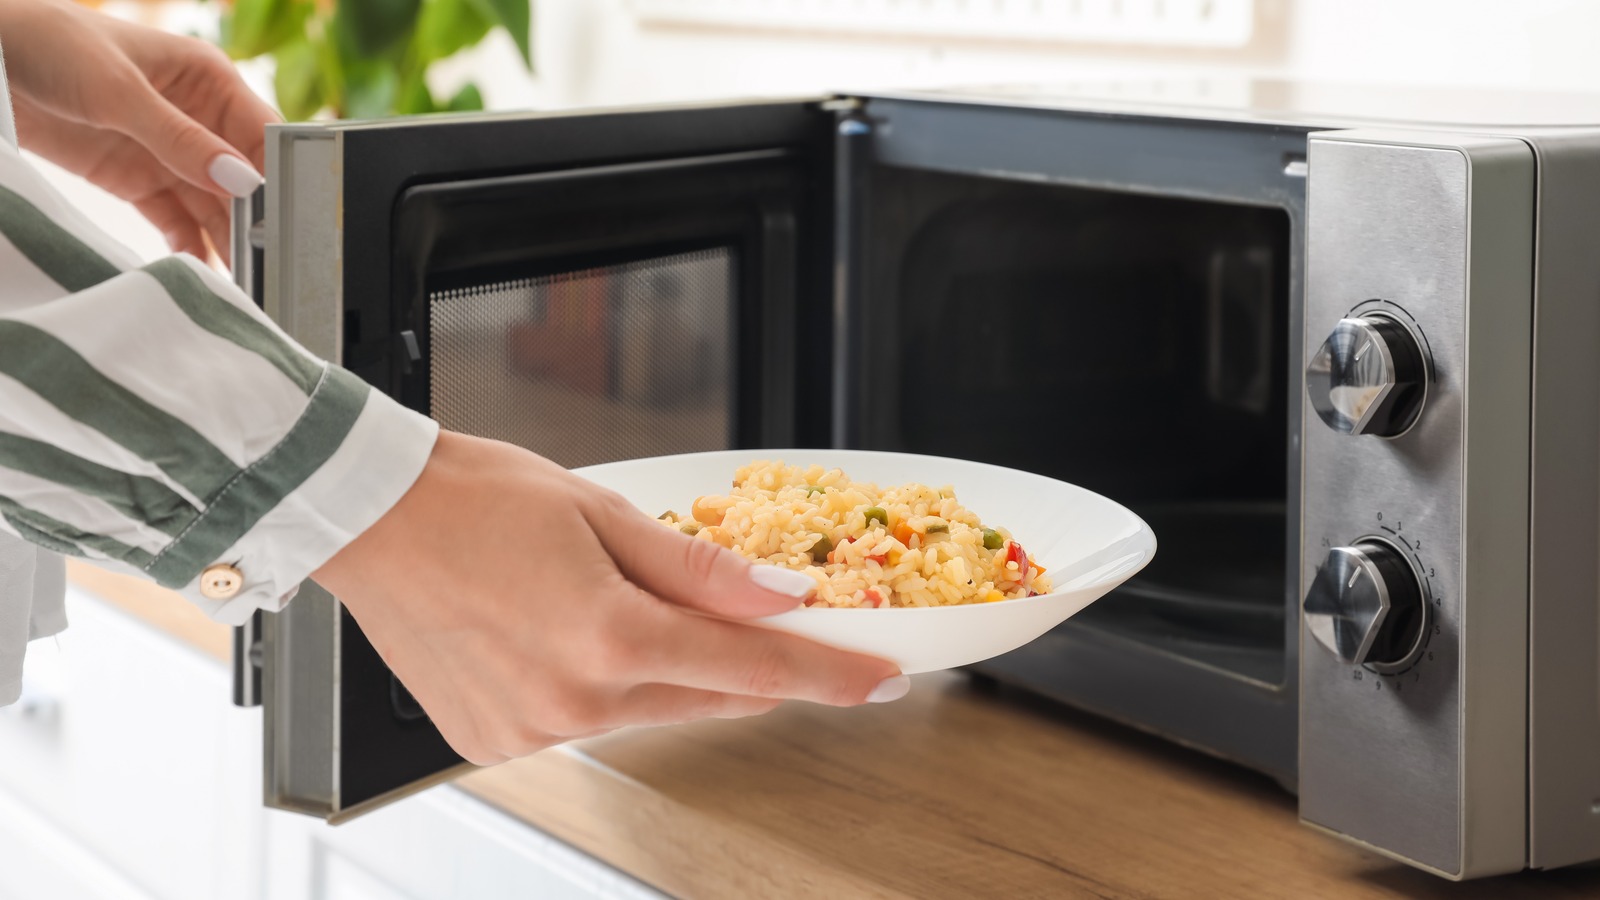 https://www.tastingtable.com/img/gallery/the-trick-to-silence-microwave-beeps-and-reheat-leftovers-in-peace/l-intro-1680704342.jpg